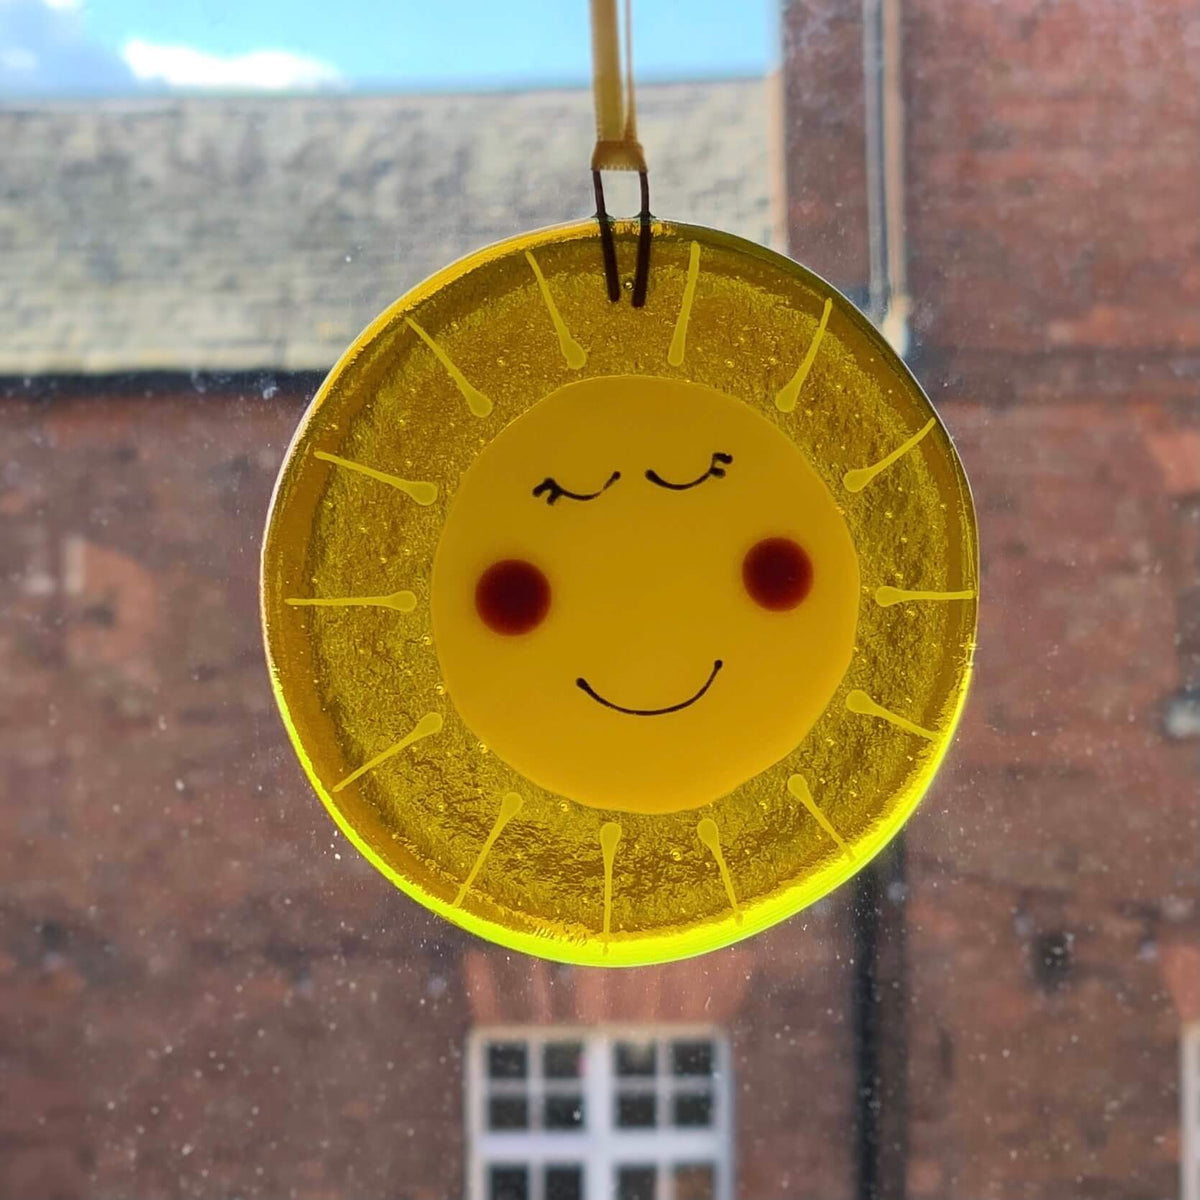 Handmade fused glass yellow circle hanging, with a smiley faced sunshine on the front, with rosey cheeks. Hangs from a piece of yellow ribbon in the window.